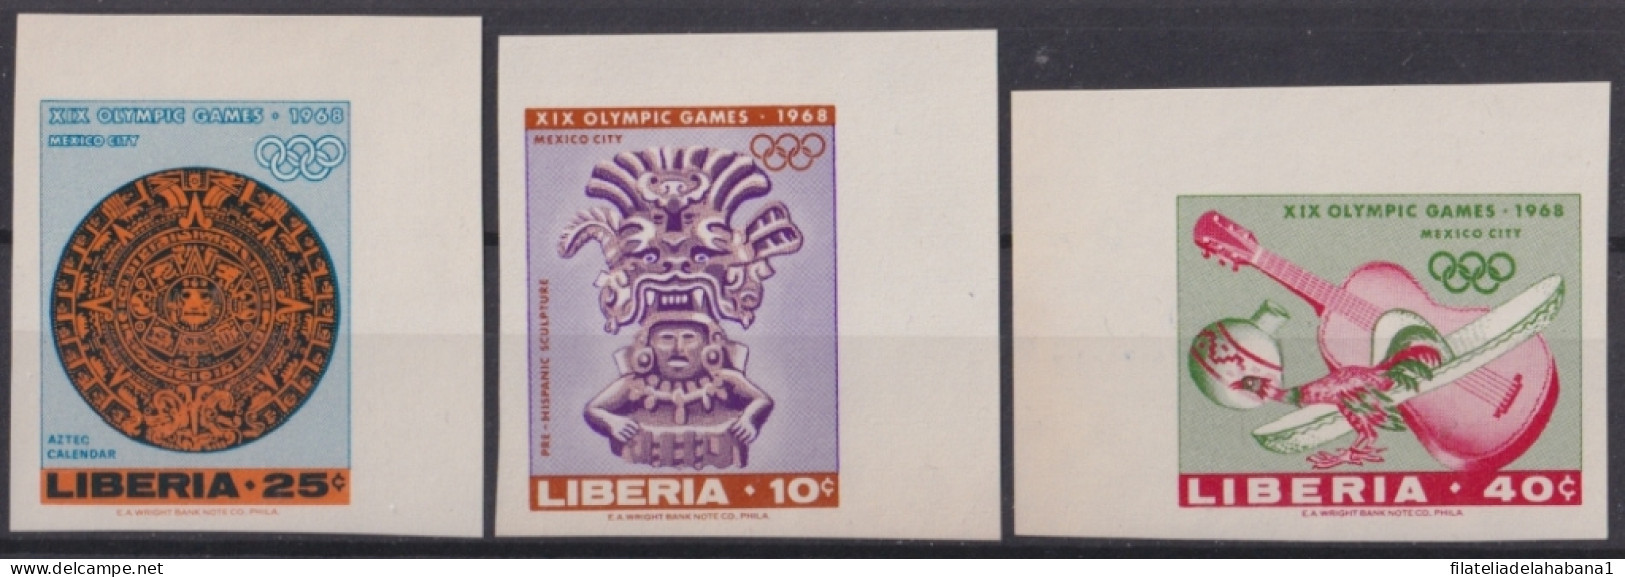 F-EX49271 LIBERIA MNH 1968 OLYMPIC GAMES IMPERFORATED ARCHEOLOGY - Ete 1968: Mexico